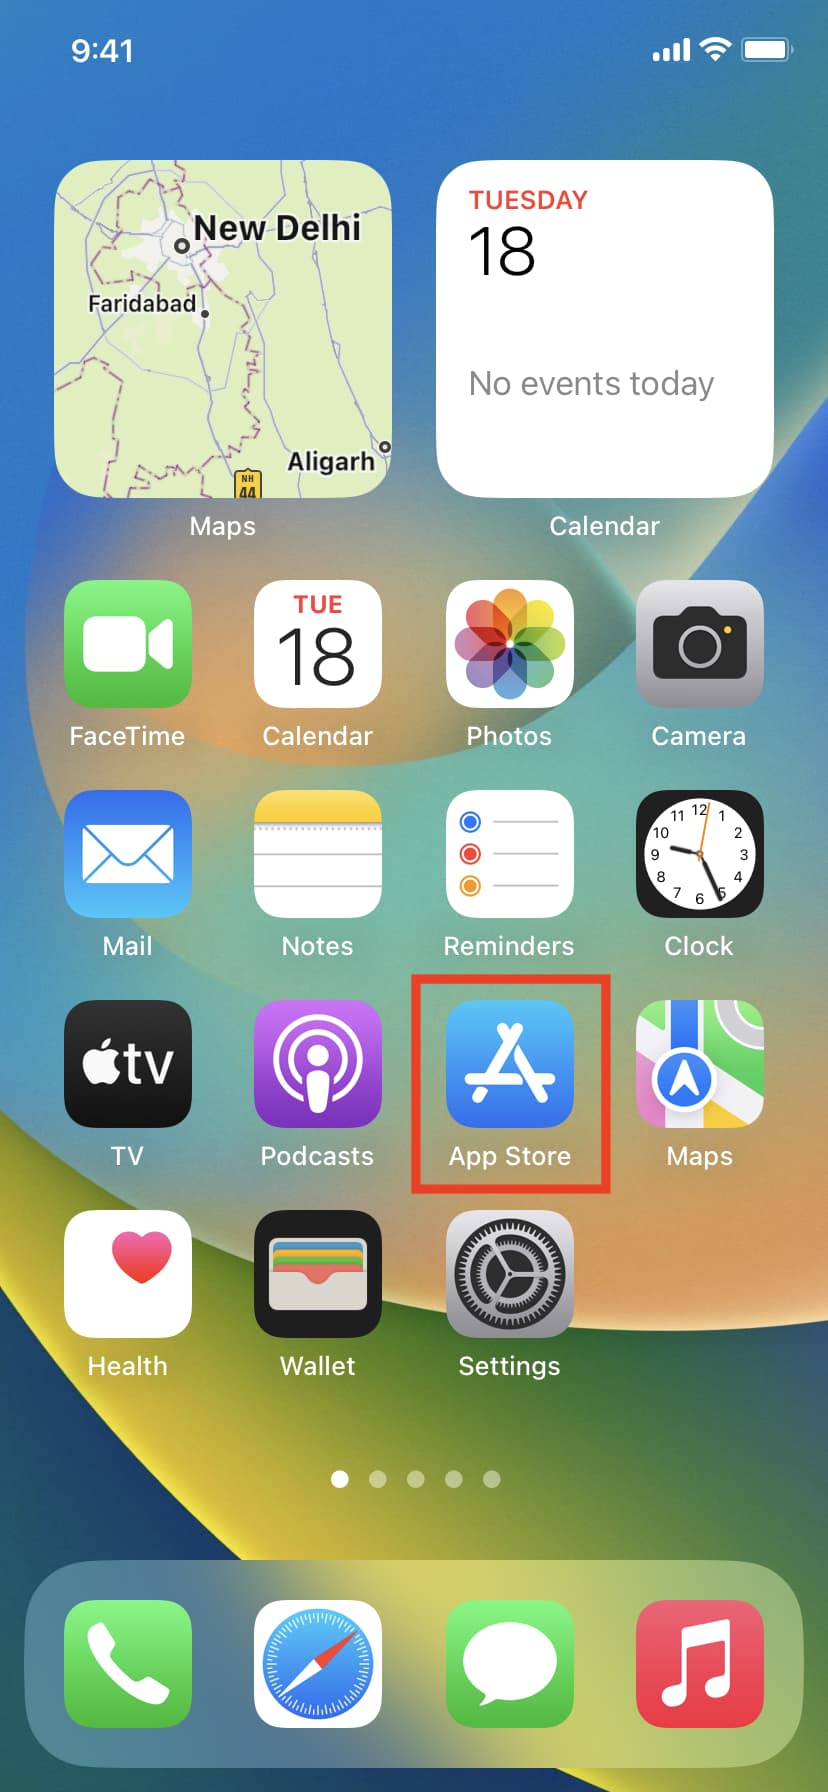 App Store on iPhone home screen